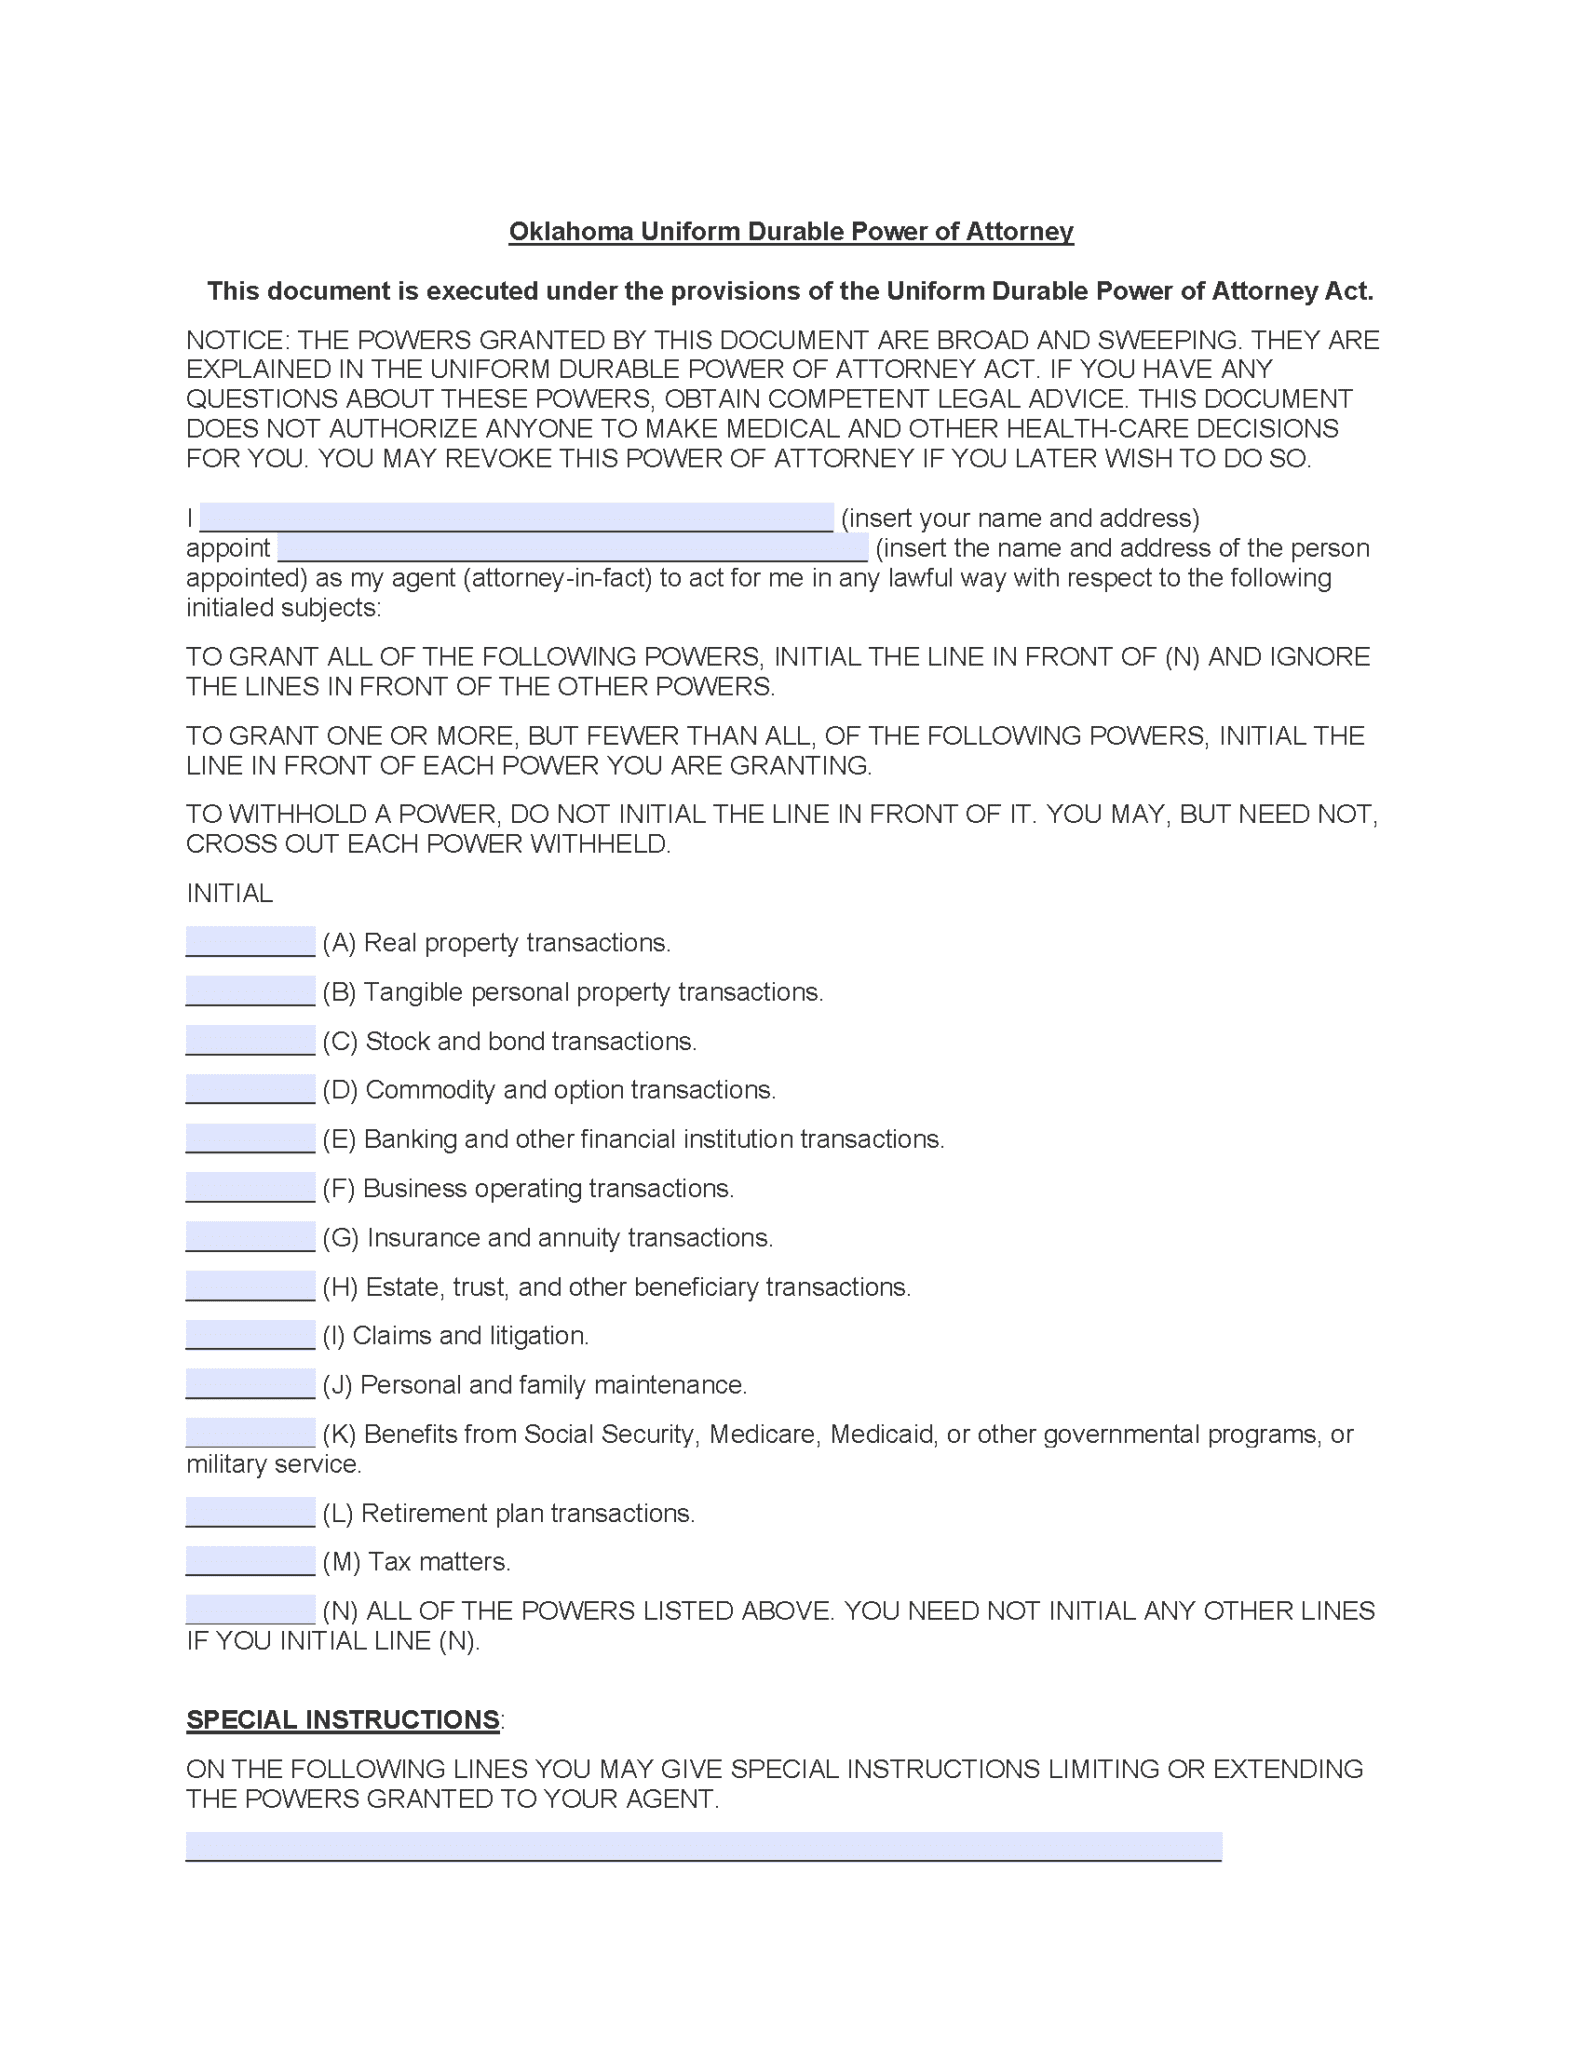 maryland-power-of-attorney-form-free-printable-free-printable